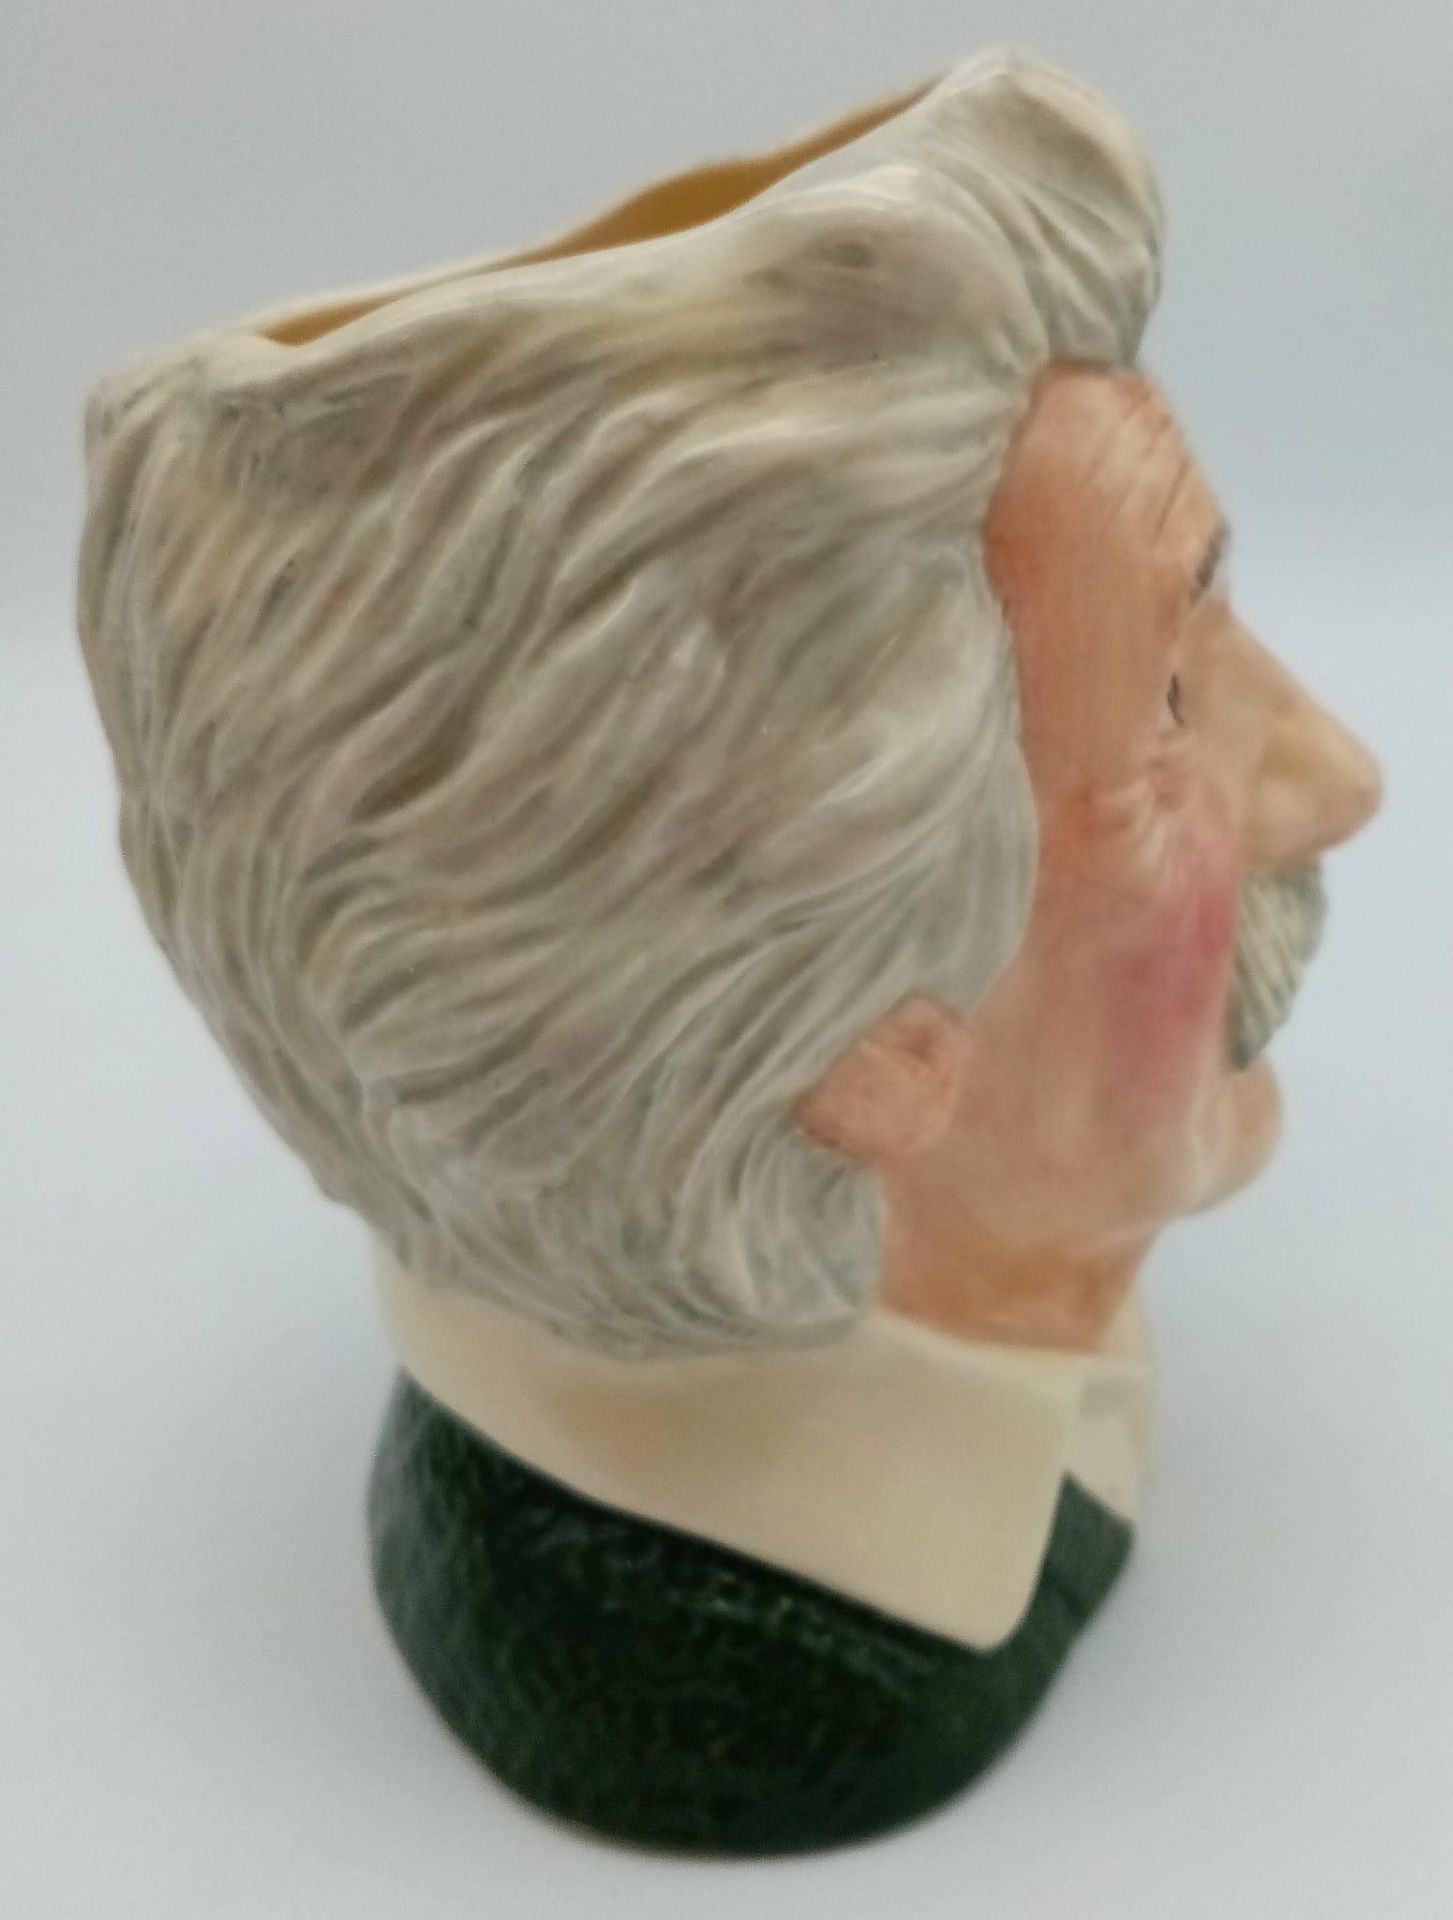 A HAND MADE AND HAND DECORATED "ALBERT EINSTEIN" TOBY JUG WITH THE THEORY OF RELATIVITY HANDLE - Image 4 of 7